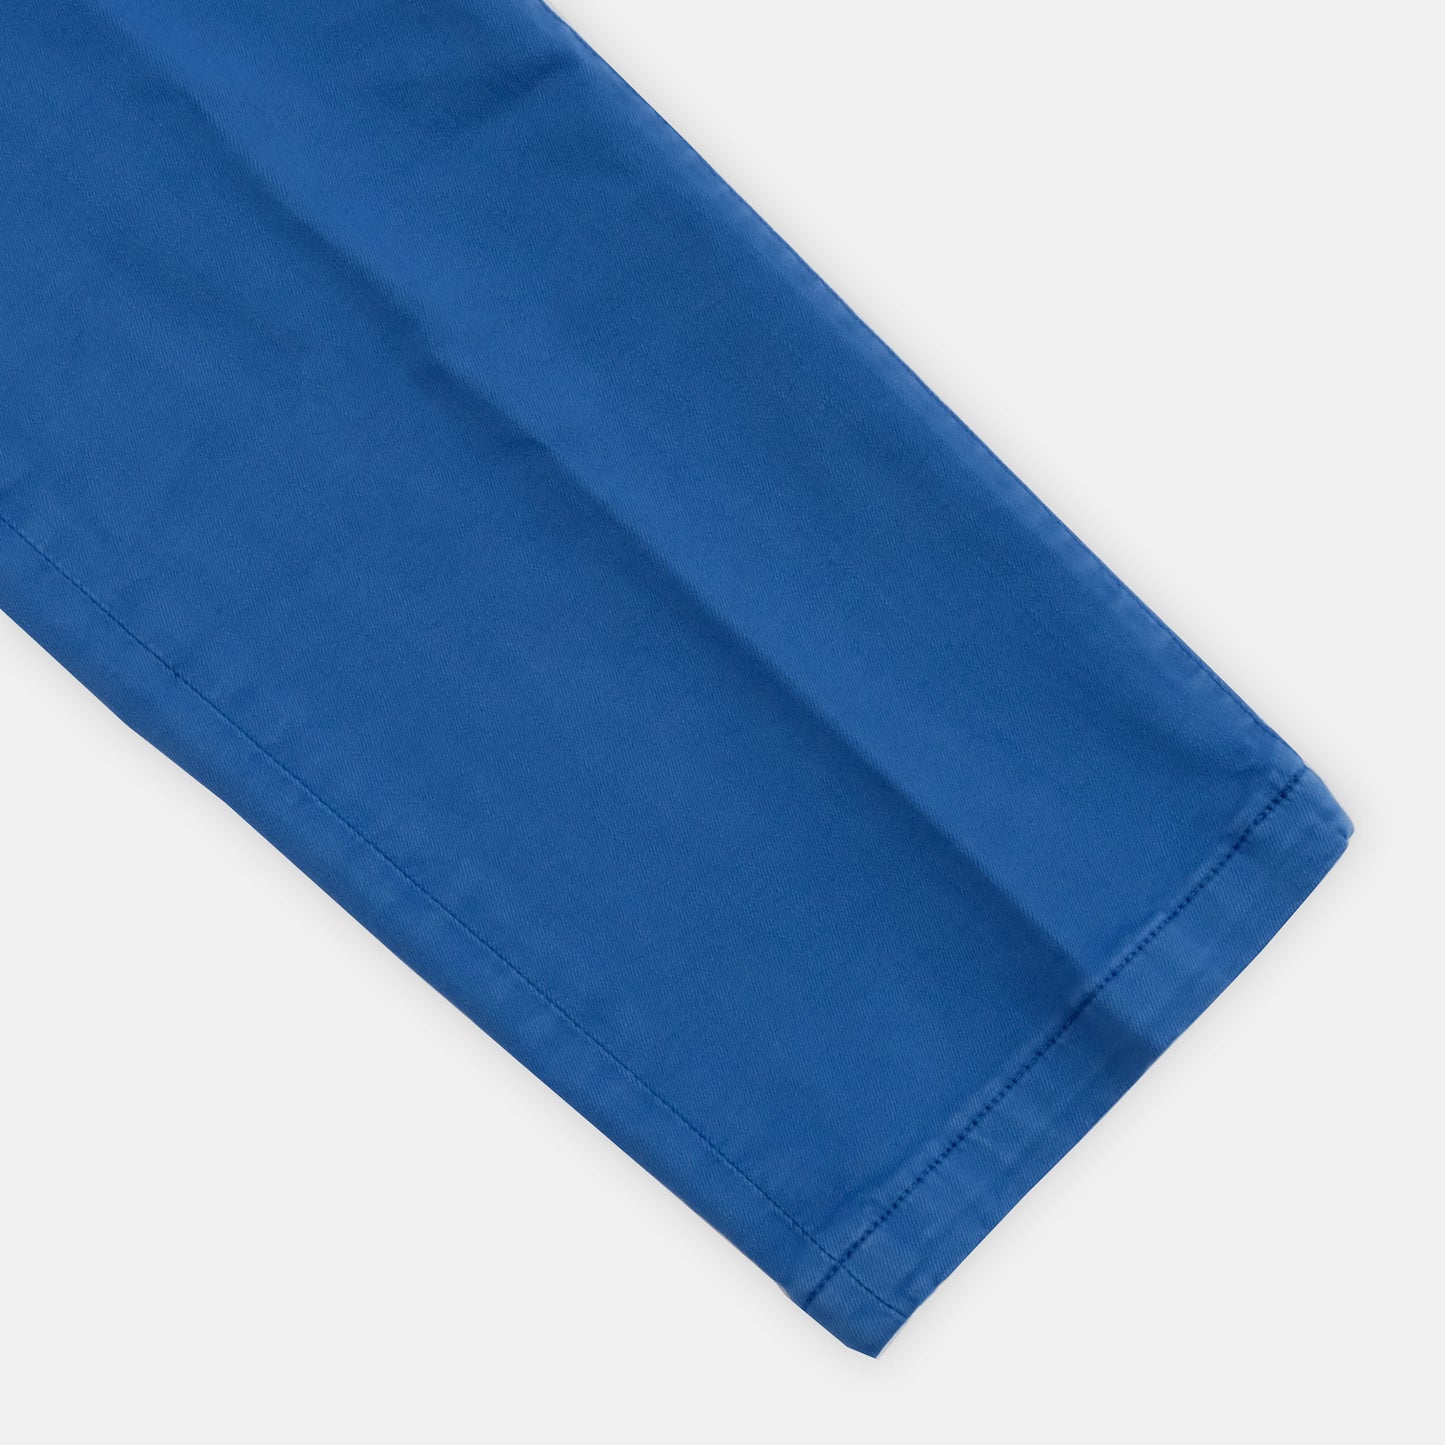 MP - Royal Cotton and Silk Tencel 5-Pocket Jeans in Blue